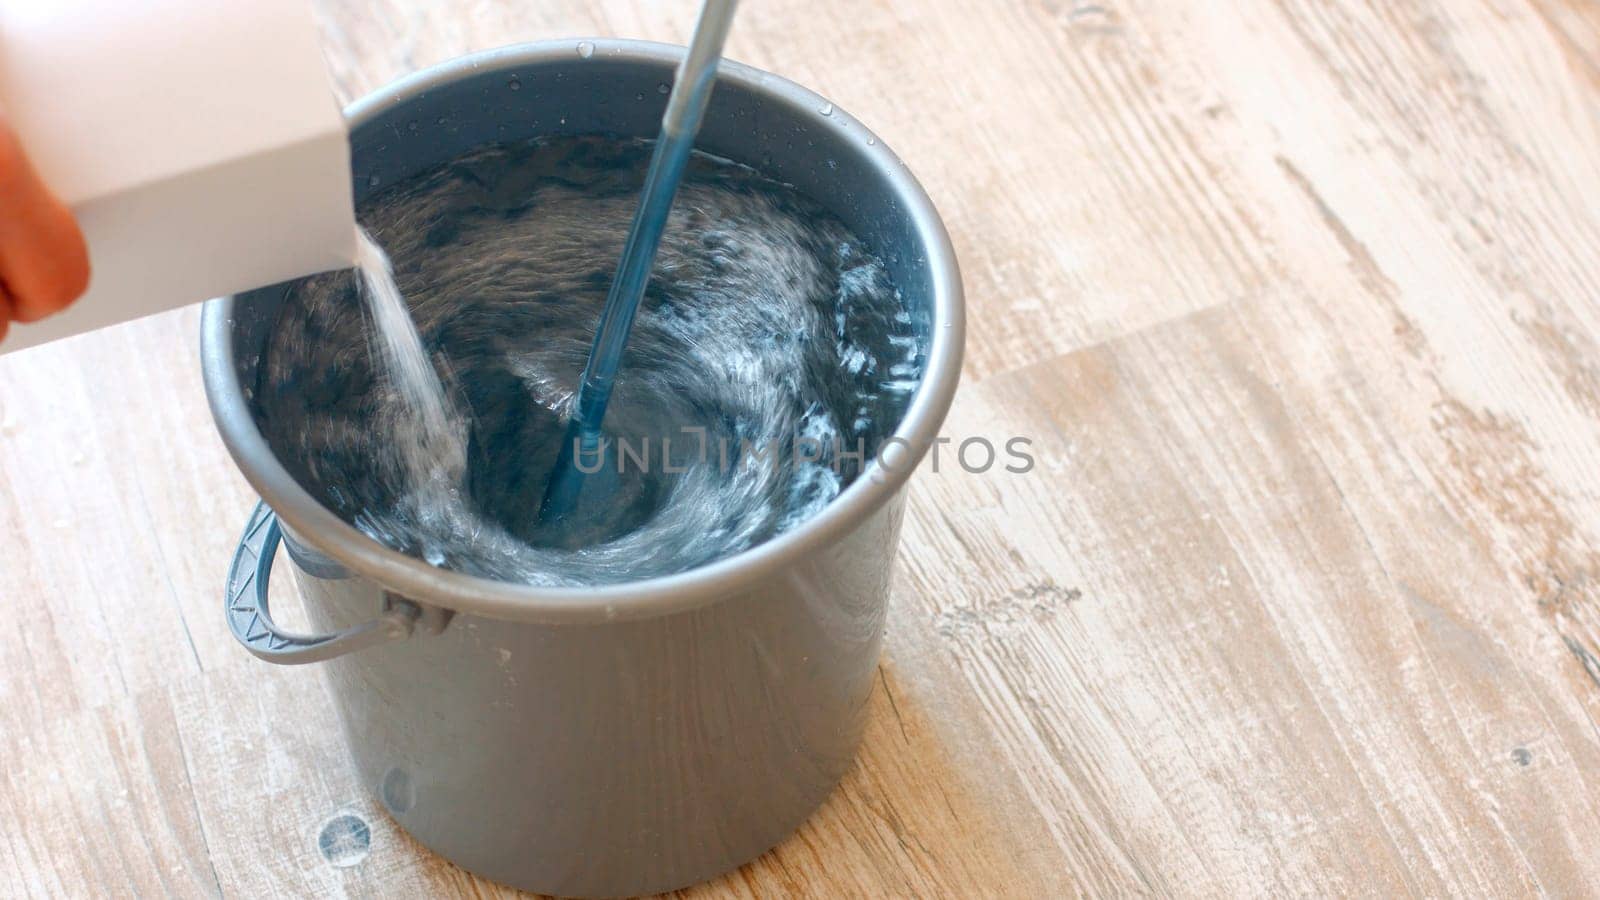 Preparation of construction glue for wallpaper. Mixing glue with water using a mixer.